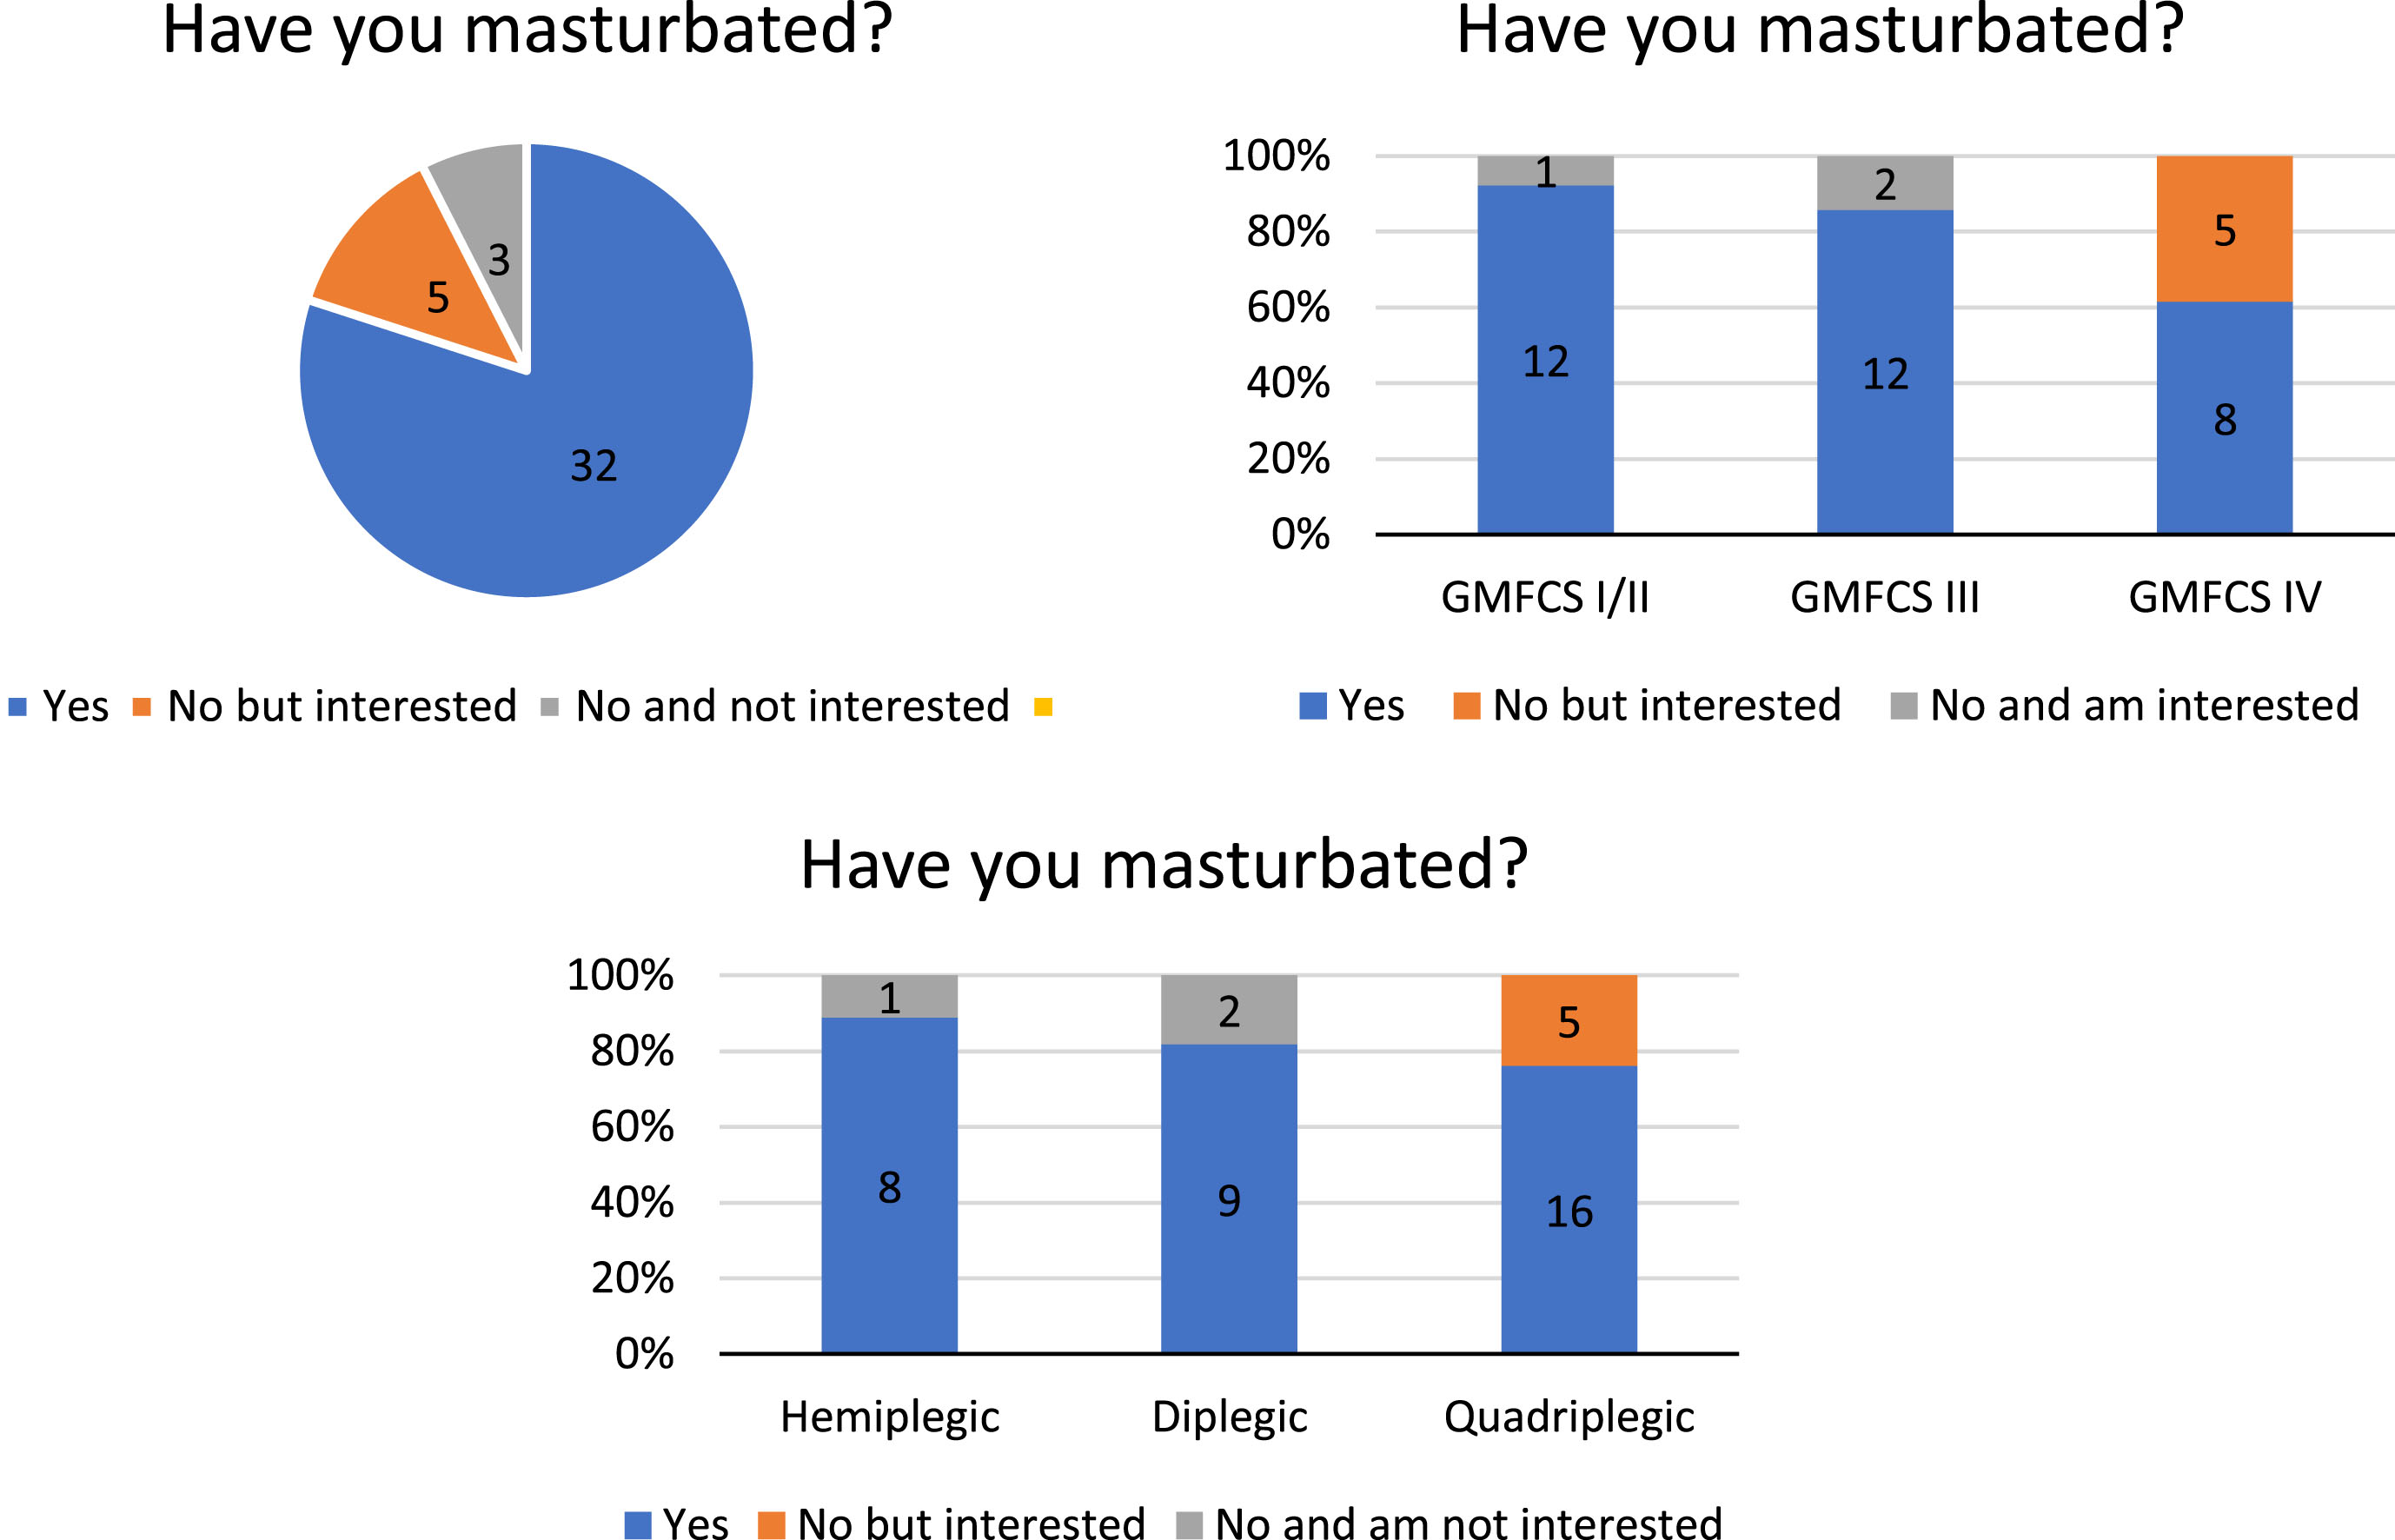 Masturbation behavior (a) overall, (b) by Gross Motor Function Classification System (GMFCS) level, and (c) by topographical distribution.